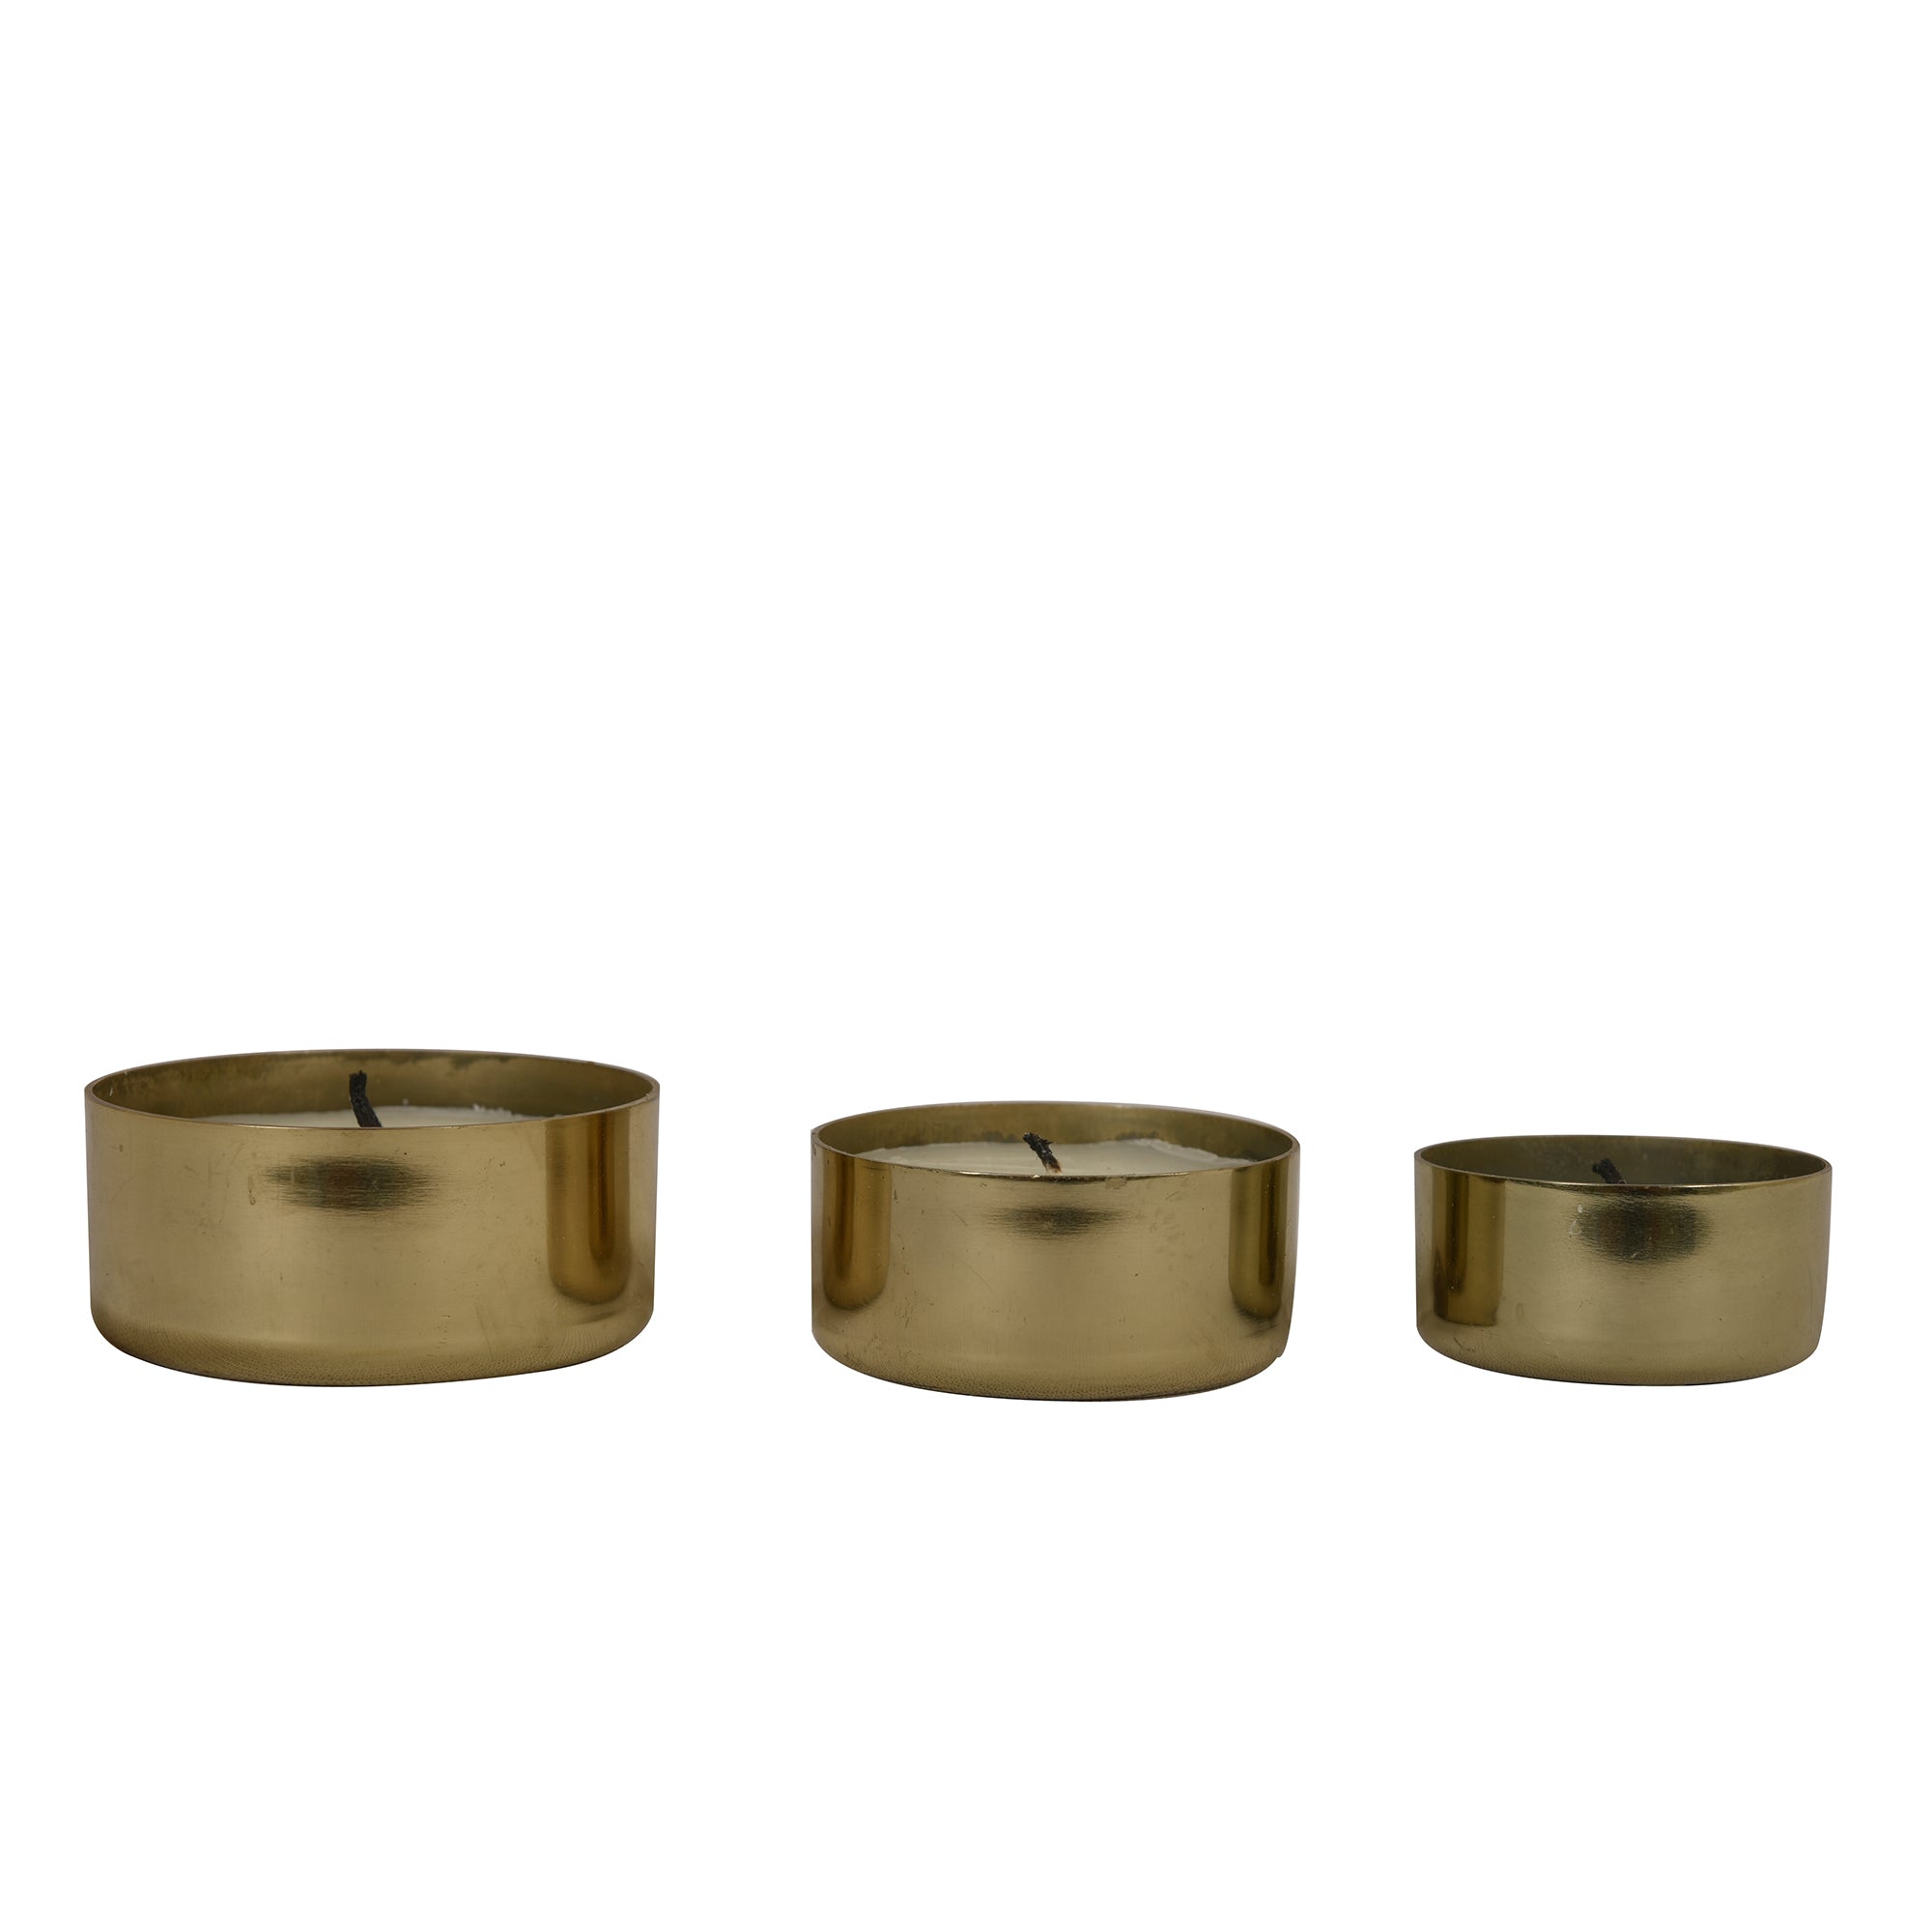 Roshni Metal Votives Diyas with filled flavoured candles 2.5 inches tall in a gift Box (Set of 3)